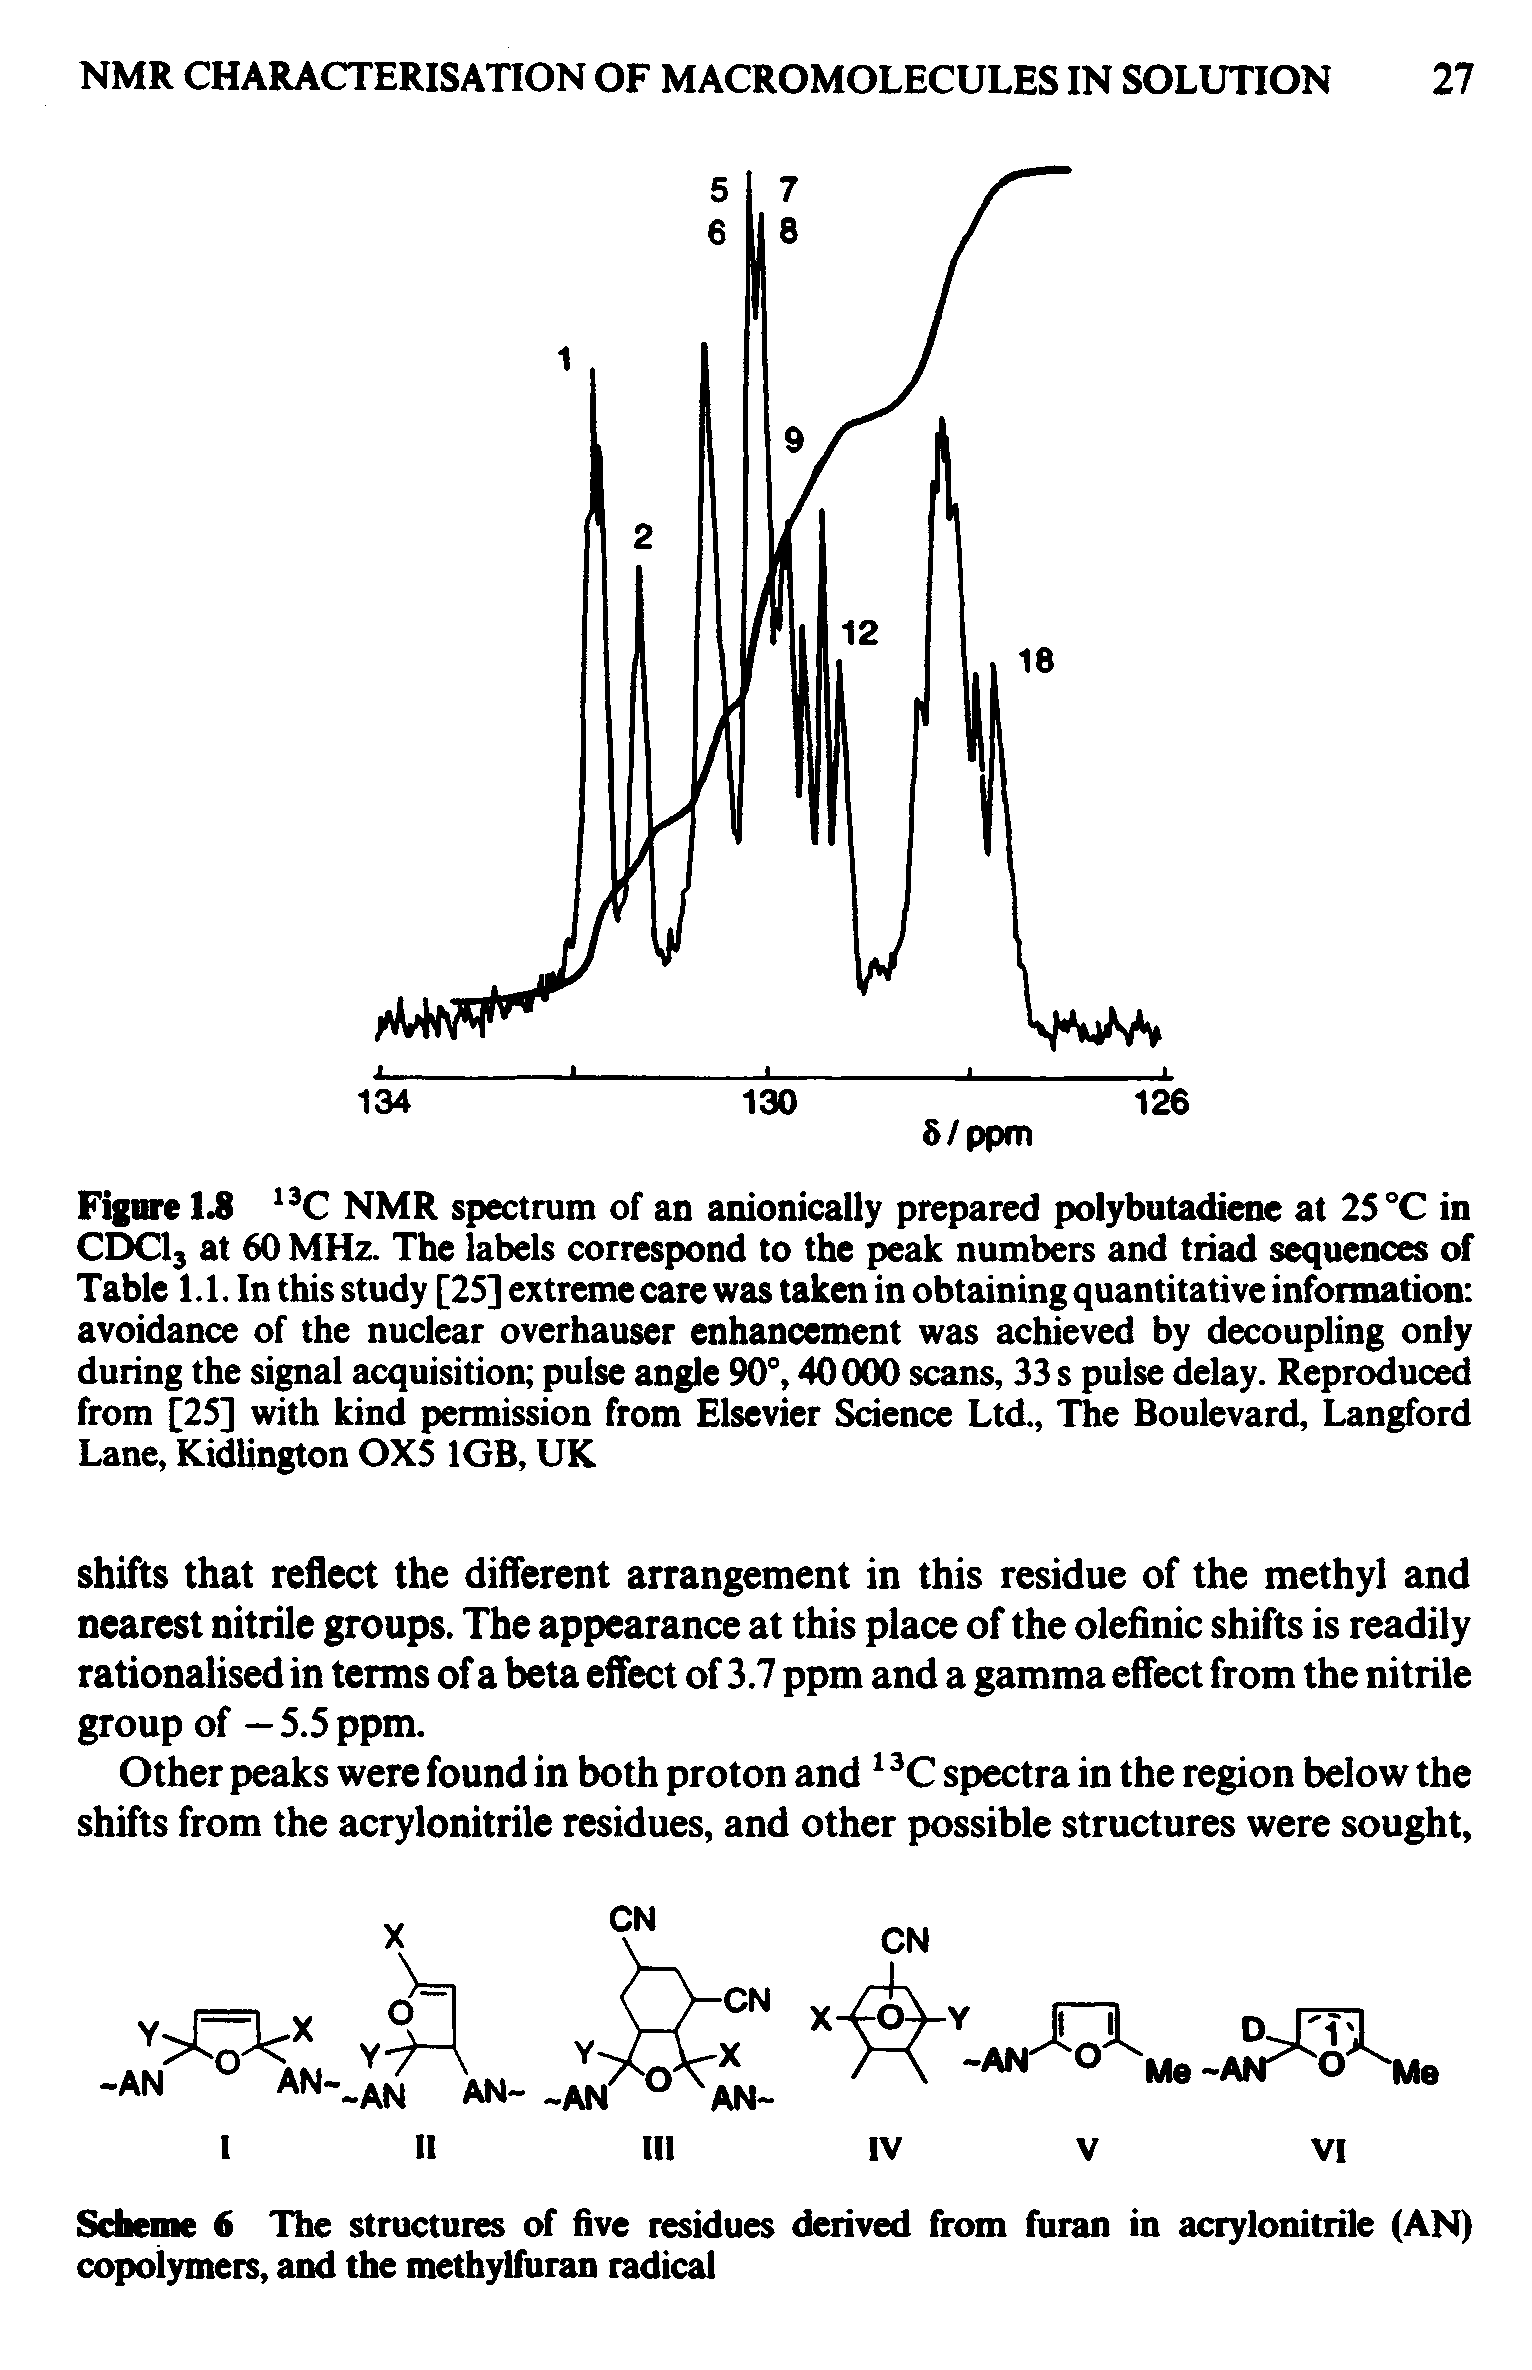 Figure 1.8 C NMR spectrum of an anionically prepared polybutadieDe at 25 °C in CDClj at 60 MHz. The labels correspond to the p numbers and triad sequences of Table 1.1. In this study [25] extrone care was taken in obtaining quantitative information avoidance of the nuclear overhauser enhancement was achieved by decoupling only during the signal acquisition pulse angle 90°, 40000 scans, 33 s pulse delay. Reproduced from [25] with kind permission from Elsevier Science Ltd., The Boulevard, Langford Lane, Kidlington 0X5 1GB, UK...